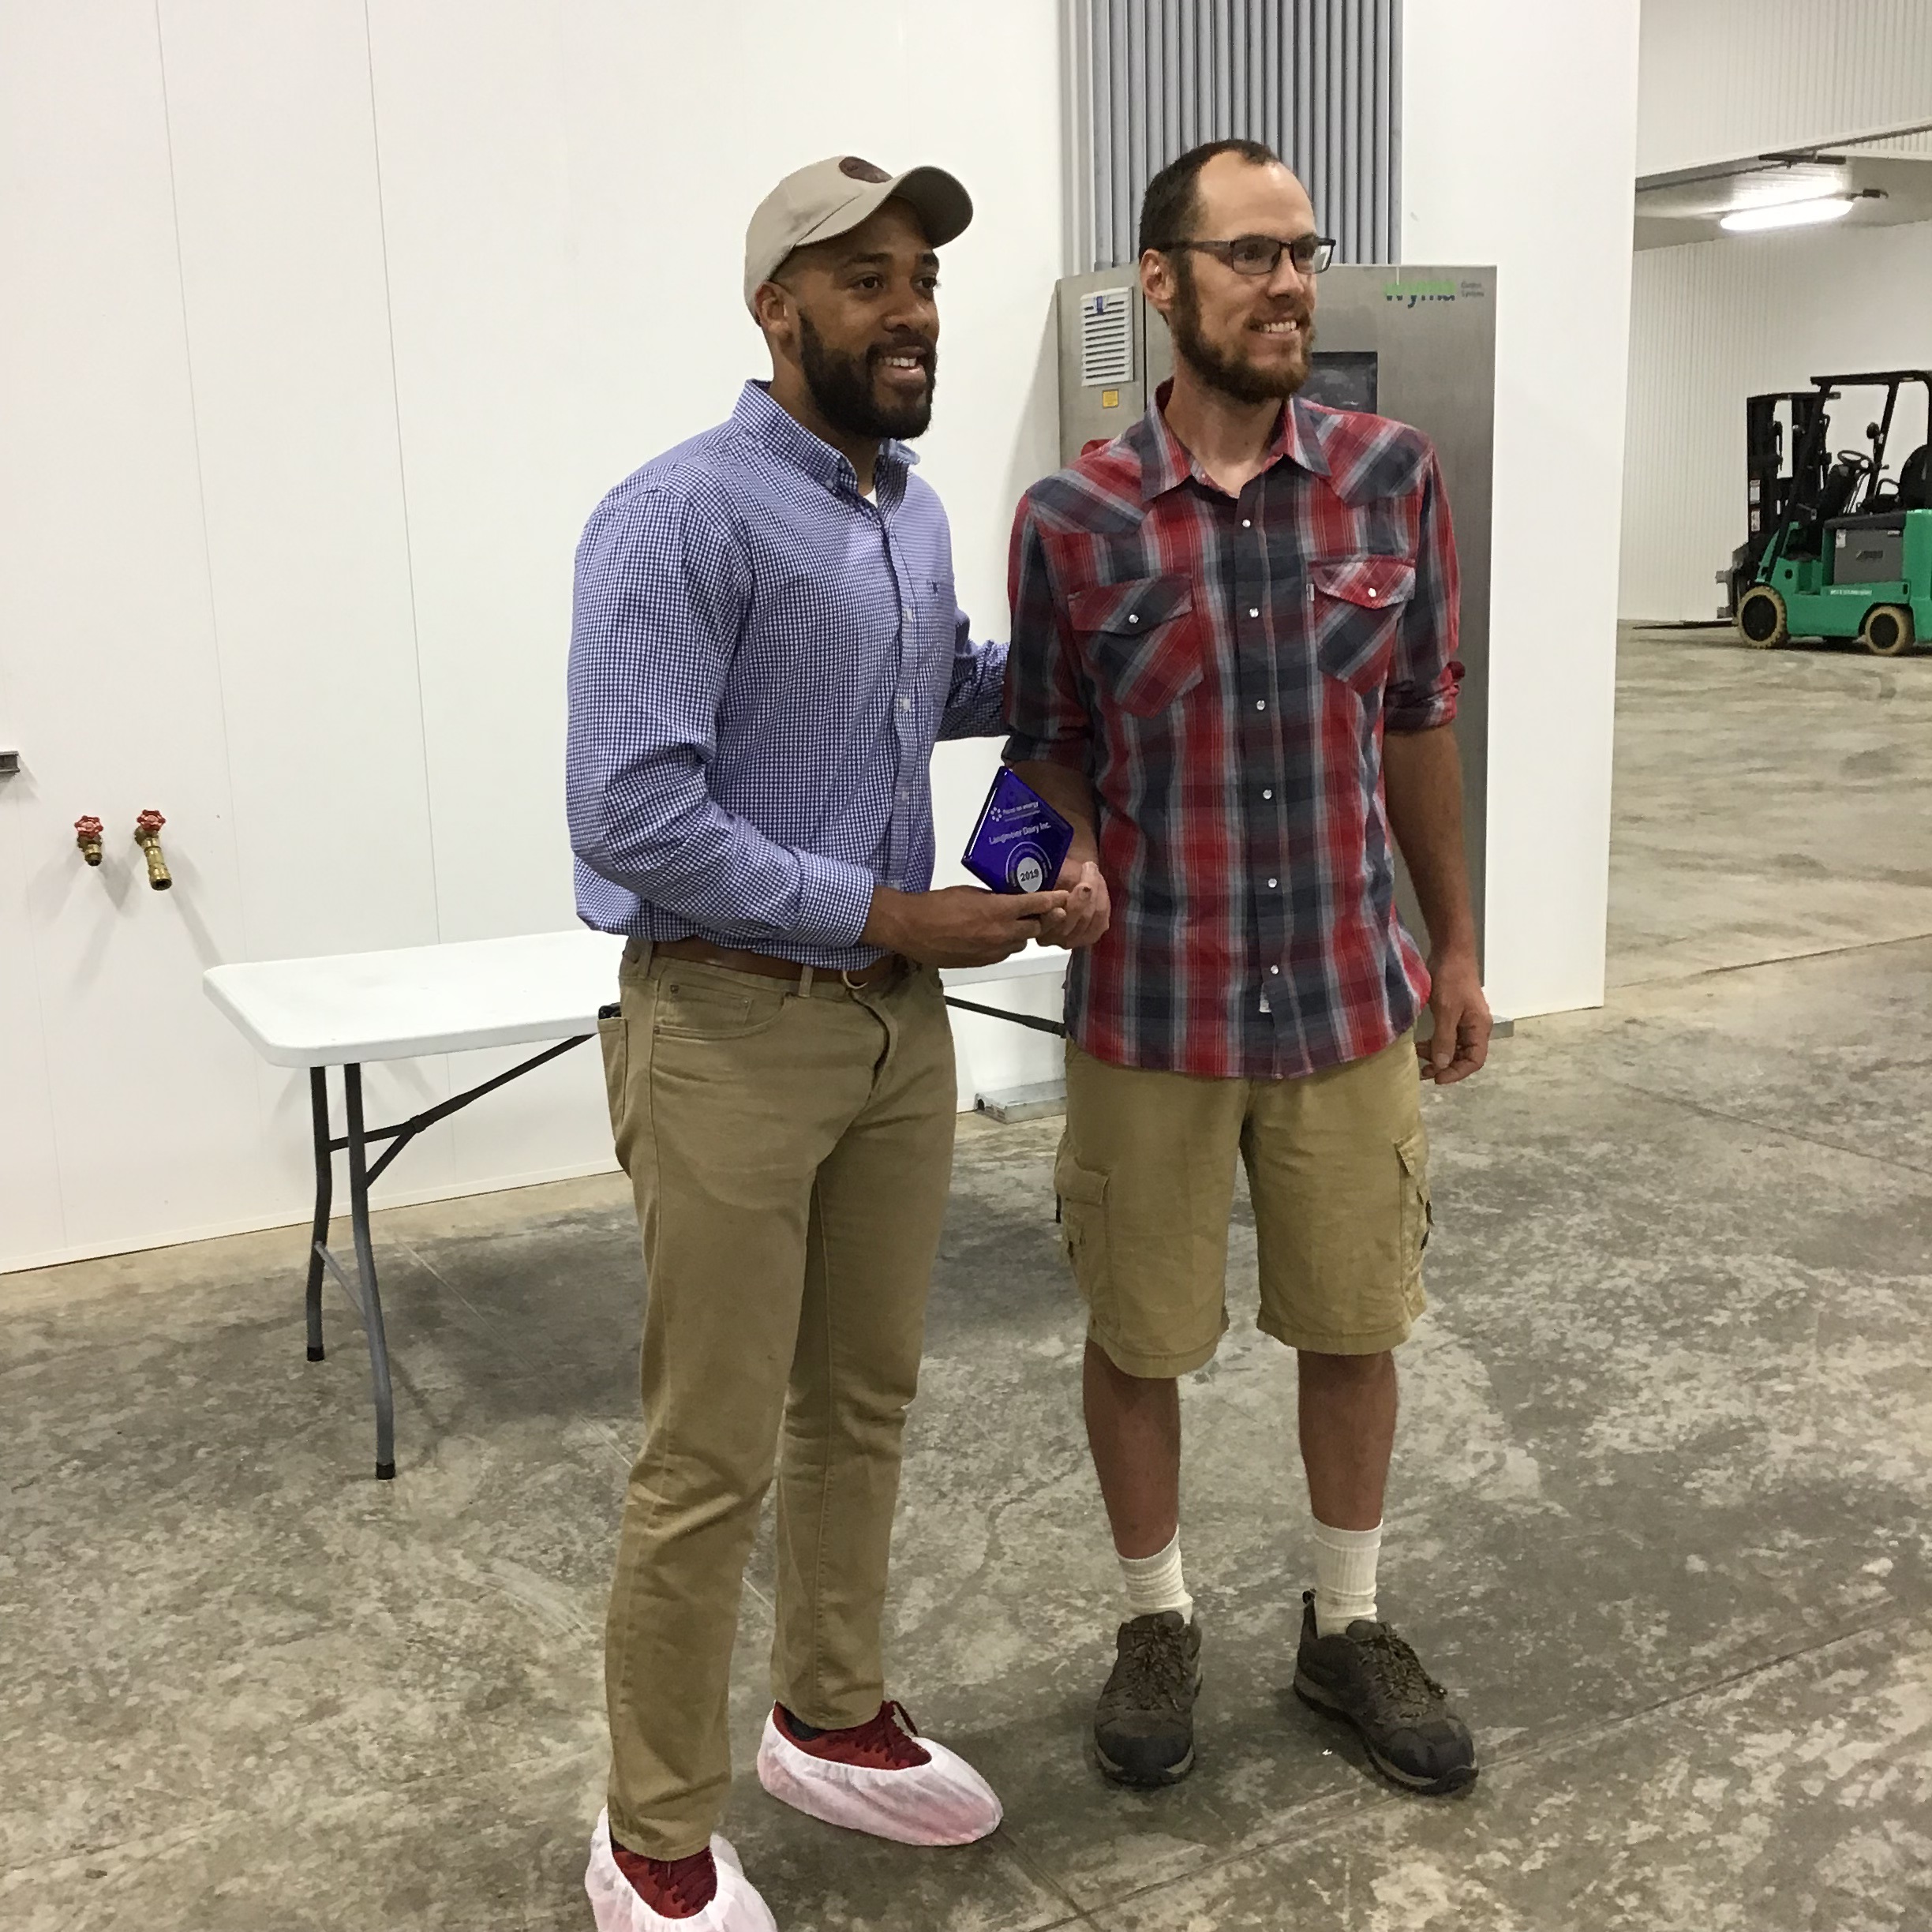 Two men stand in an industrial building, holding an award between them.